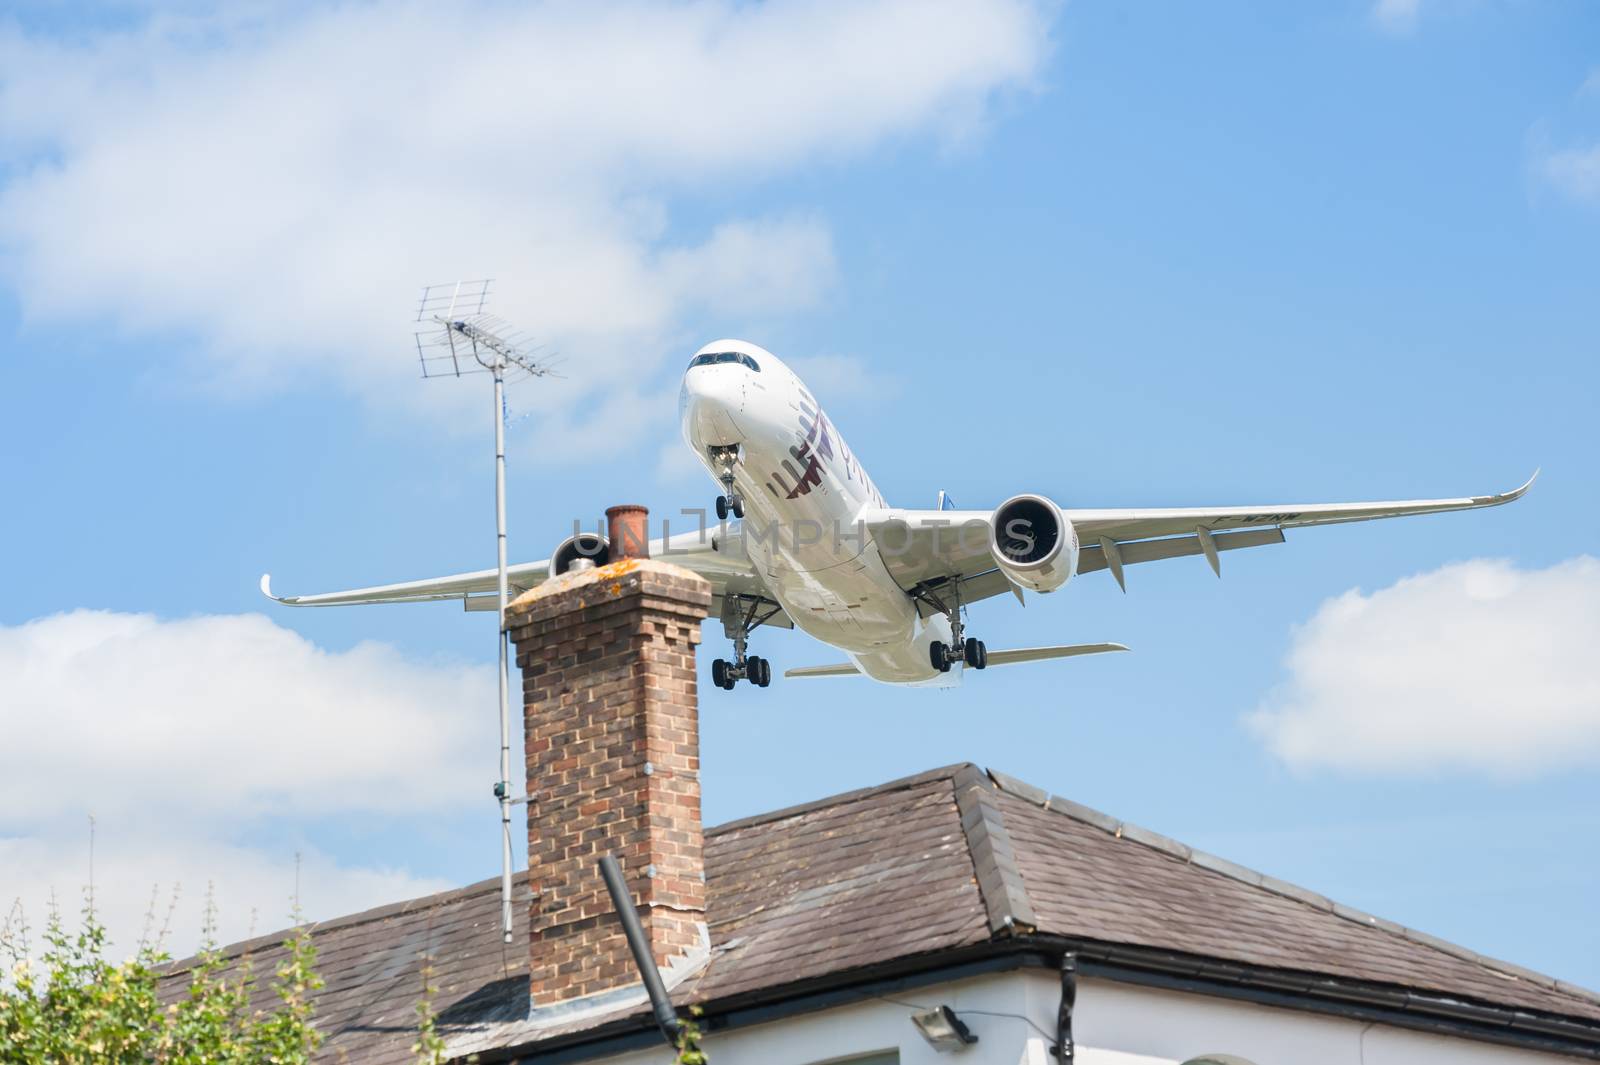 Farnborough, UK - July 14, 2014: Qatar Airways Airbus A350 on landing approach over rooftops to participate at the Farnborough Airshow,  UK